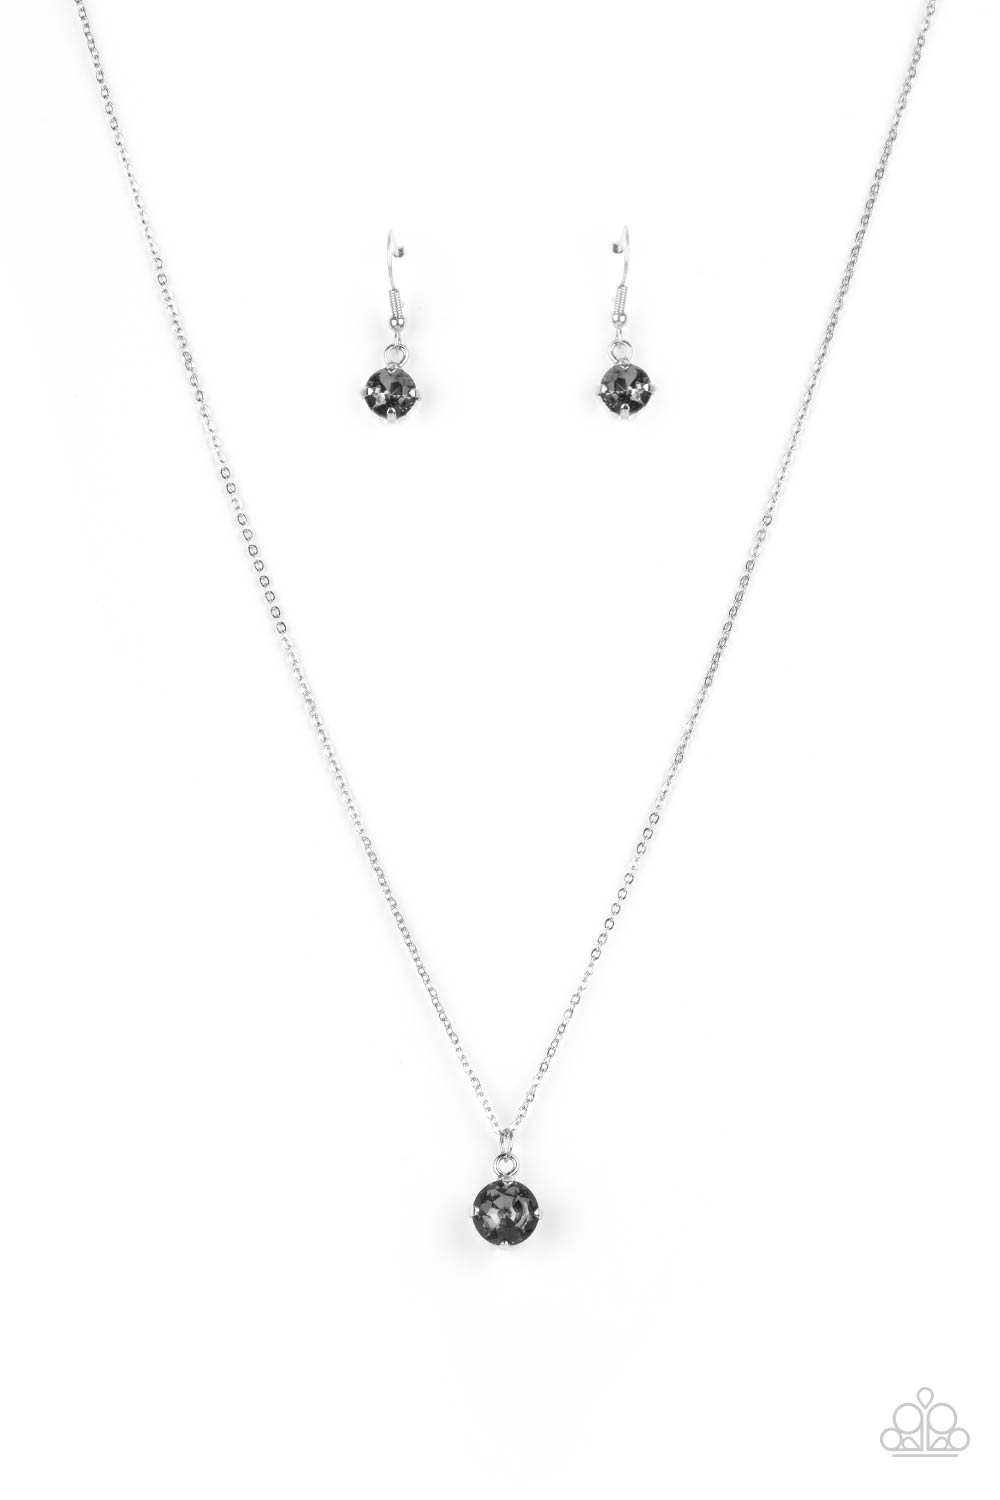 five-dollar-jewelry-undeniably-demure-silver-necklace-paparazzi-accessories